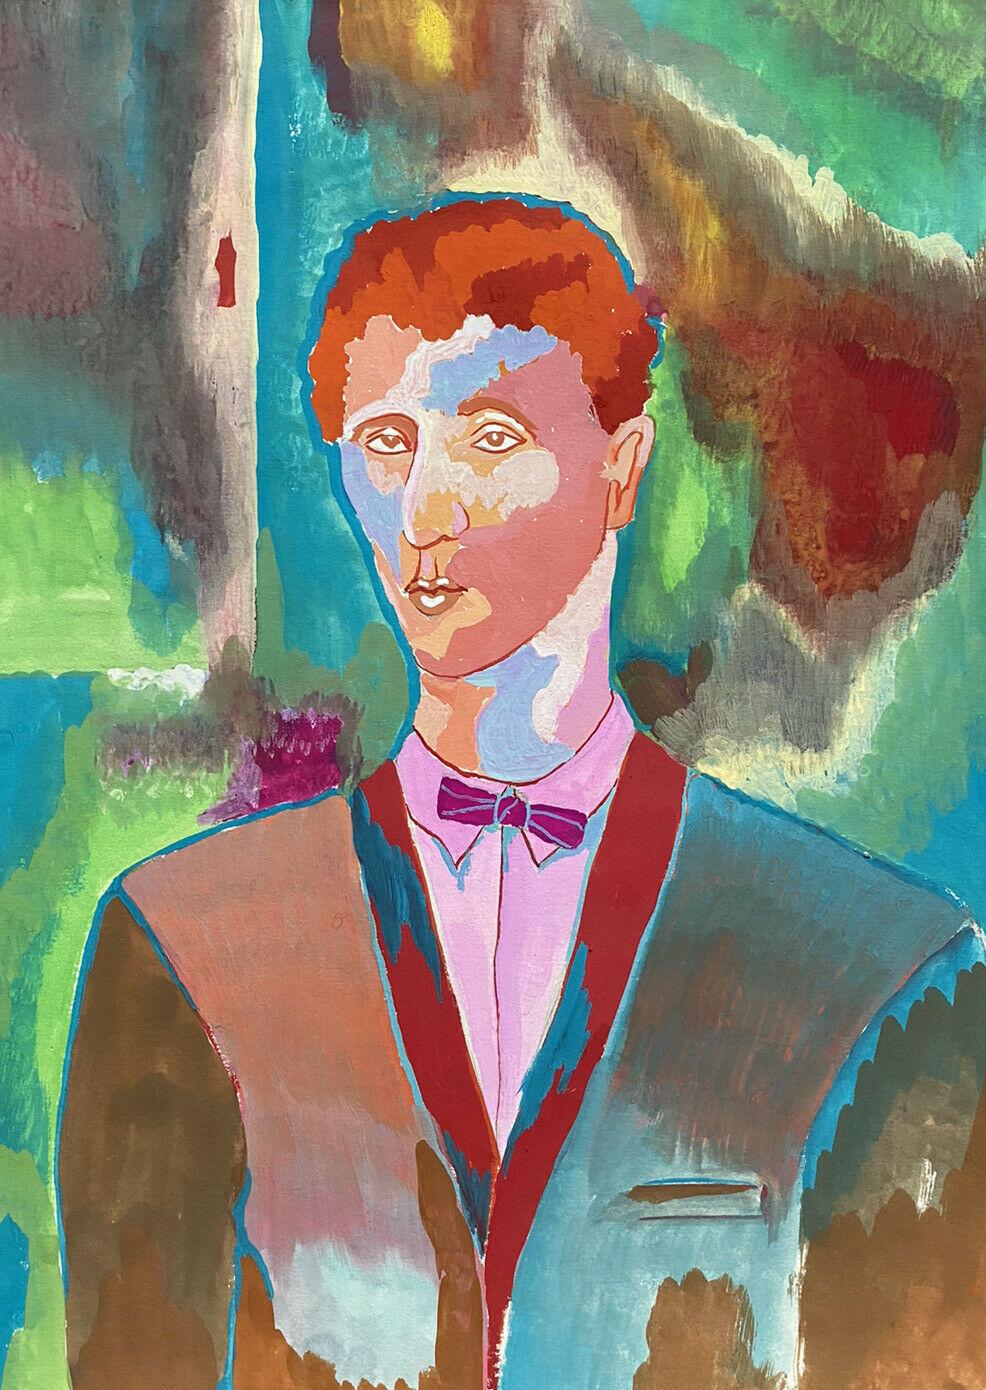 Jean Marc Nude Painting - COLORFUL 20th CENTURY FRENCH MODERNIST PAINTING - MALE PORTRAIT BOW TIE CARDIGAN